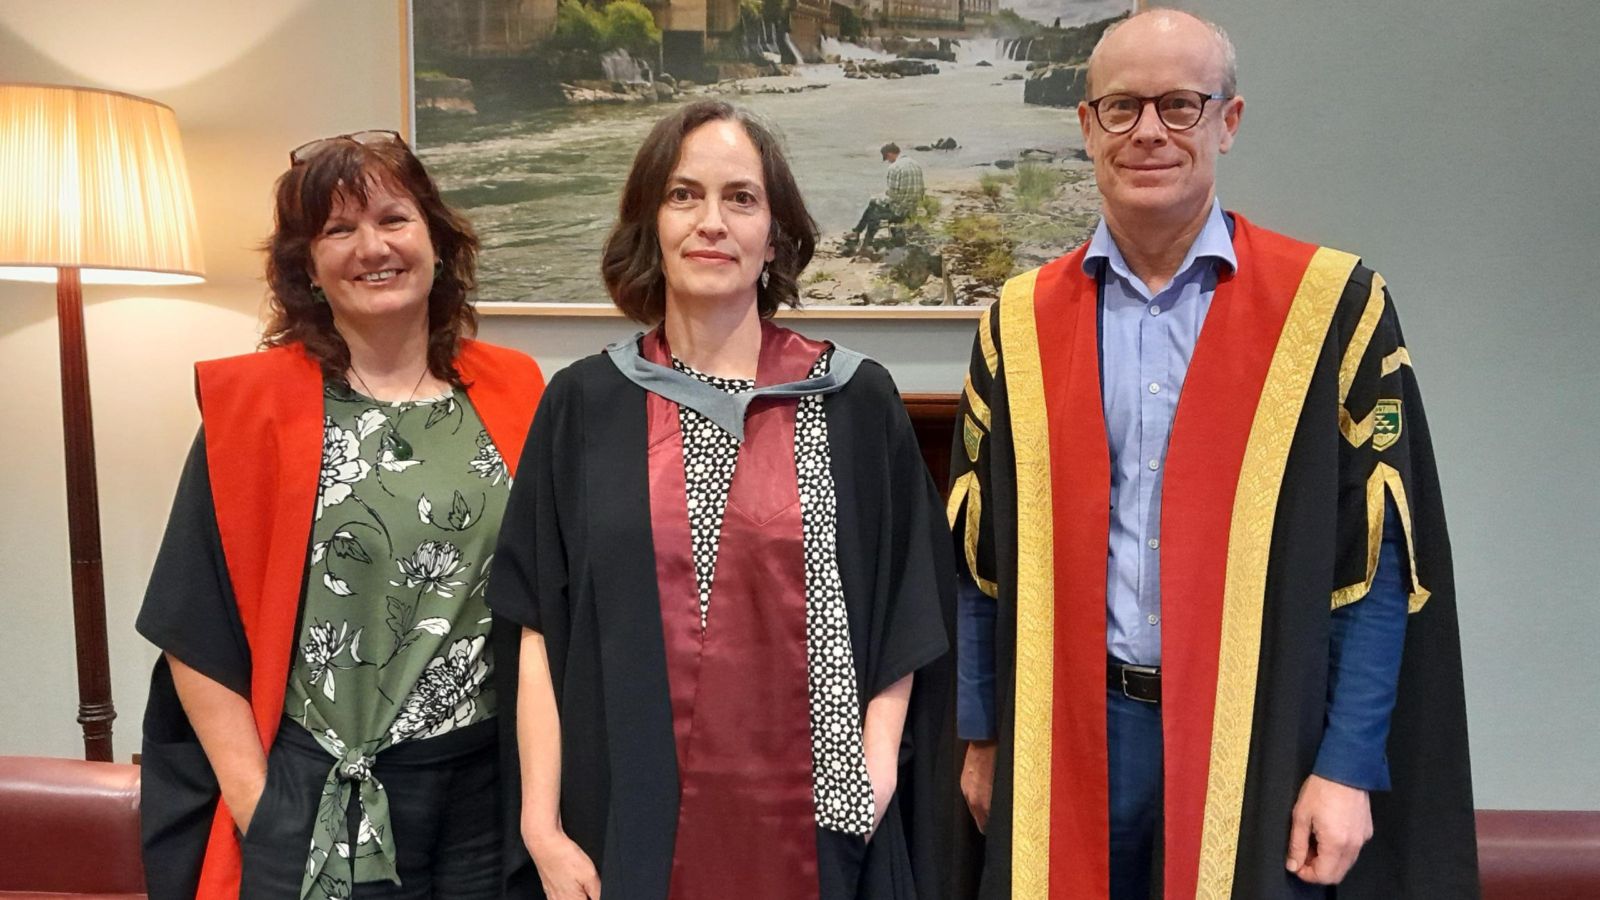 Rebecca Priestley, dressed in academic robes, with Nic Smith and another academic at her inaugural lecture.